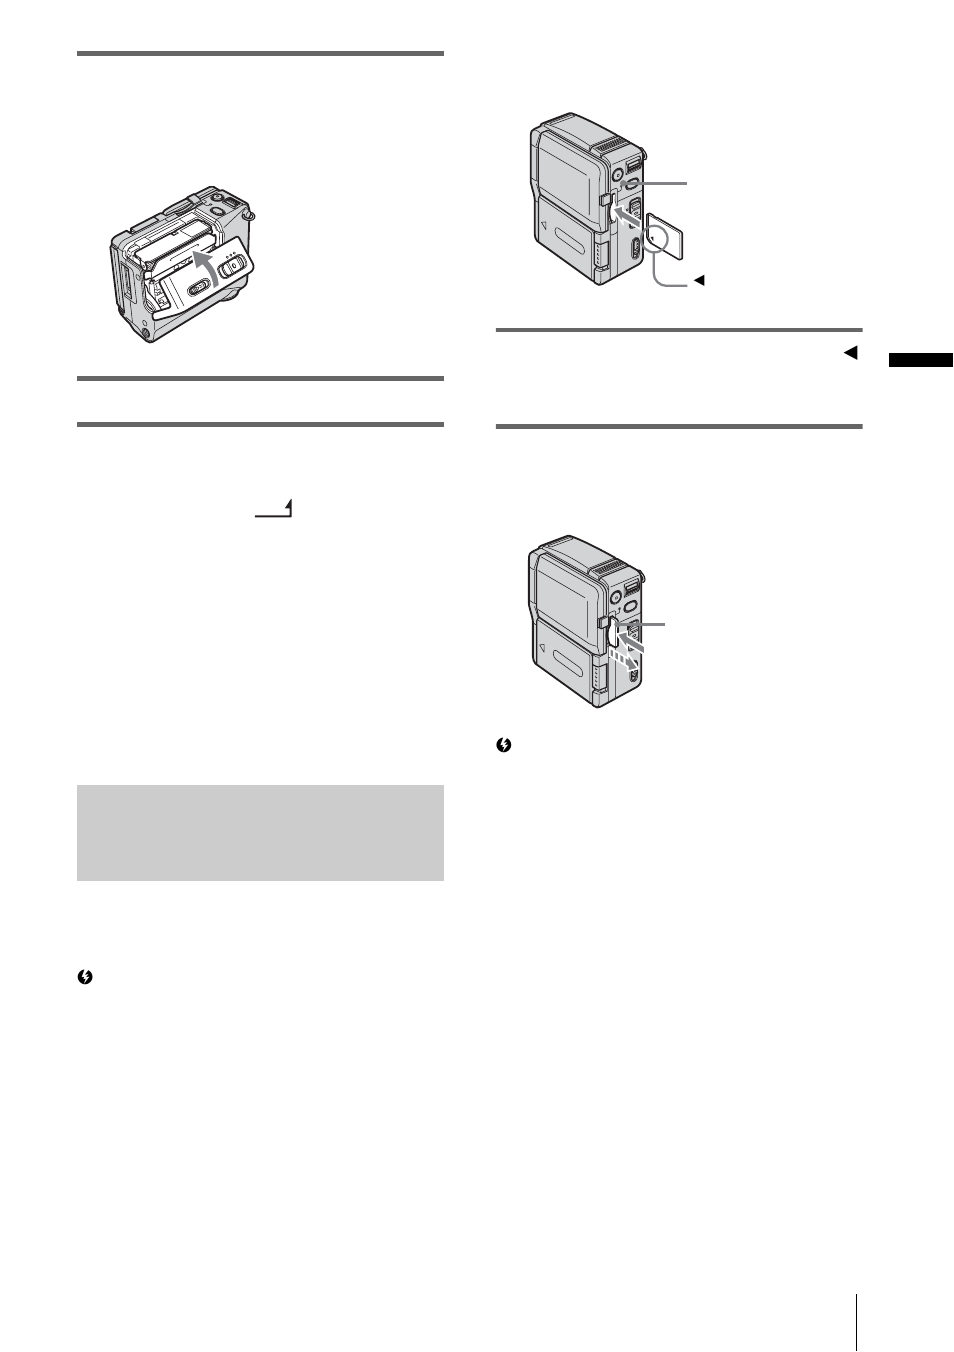 Inserting a “memory stick duo | Sony DCR-IP1 User Manual | Page 19 / 116